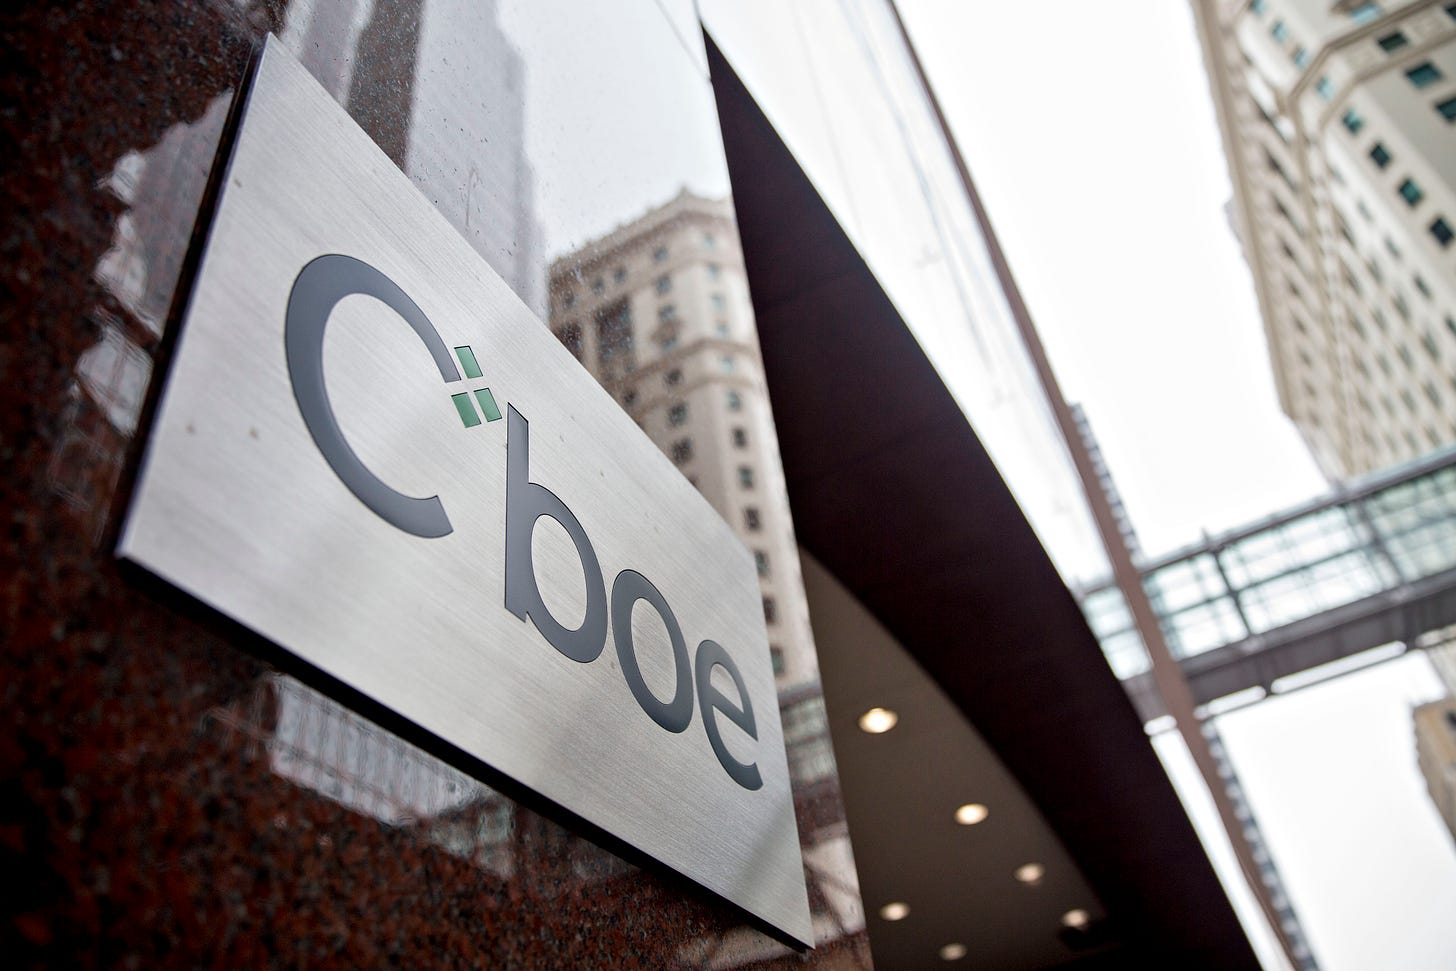 Cboe Global Markets Inc. building in Chicago, Illinois.